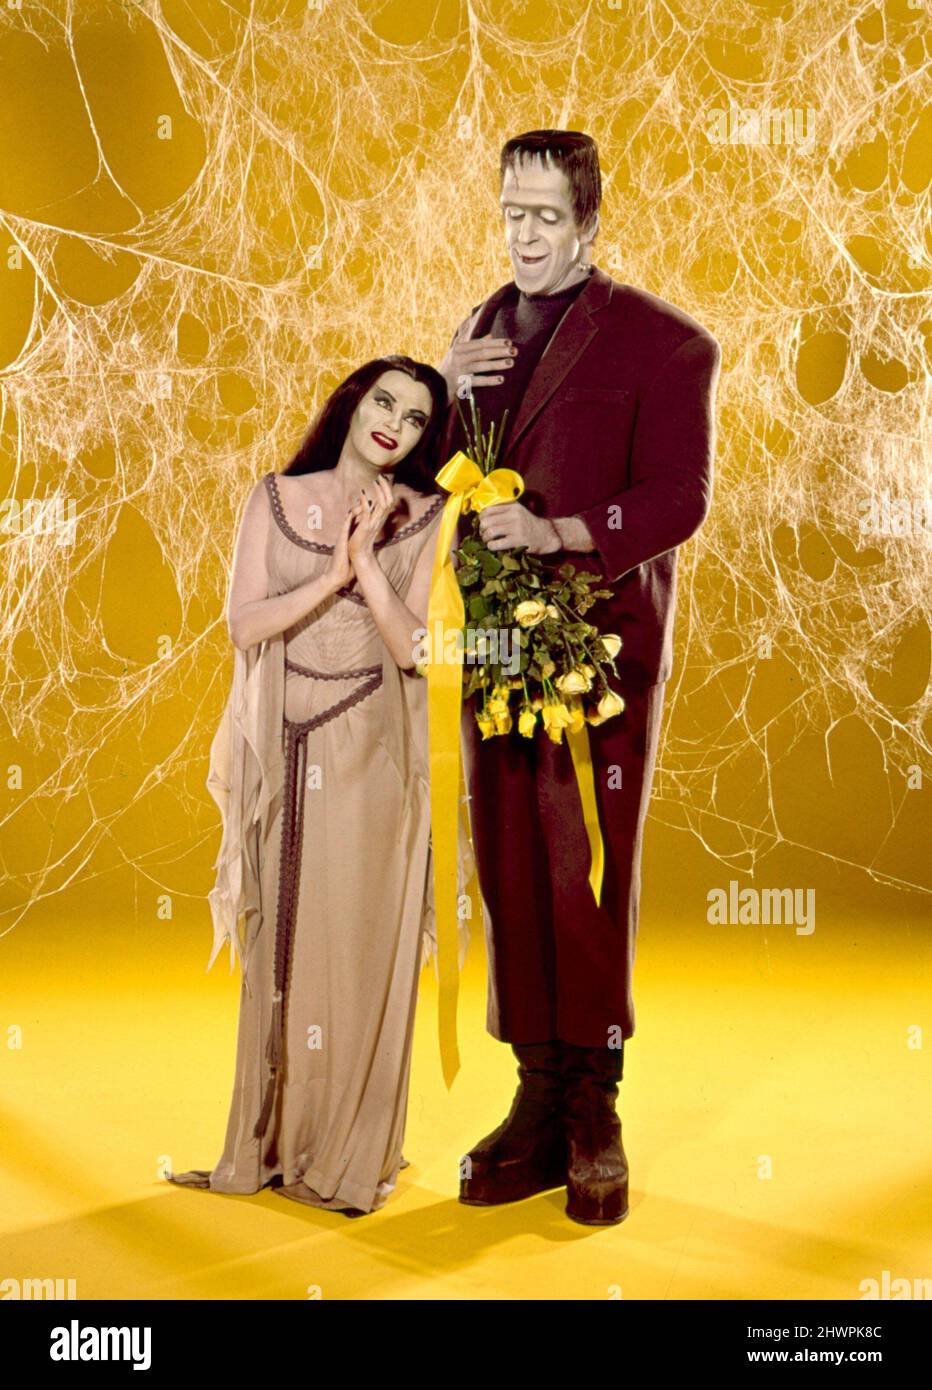 YVONNE DE CARLO and FRED GWYNNE in THE MUNSTERS (1964). Credit: CBS/MCA/UNIVERSAL / Album Stock Photo